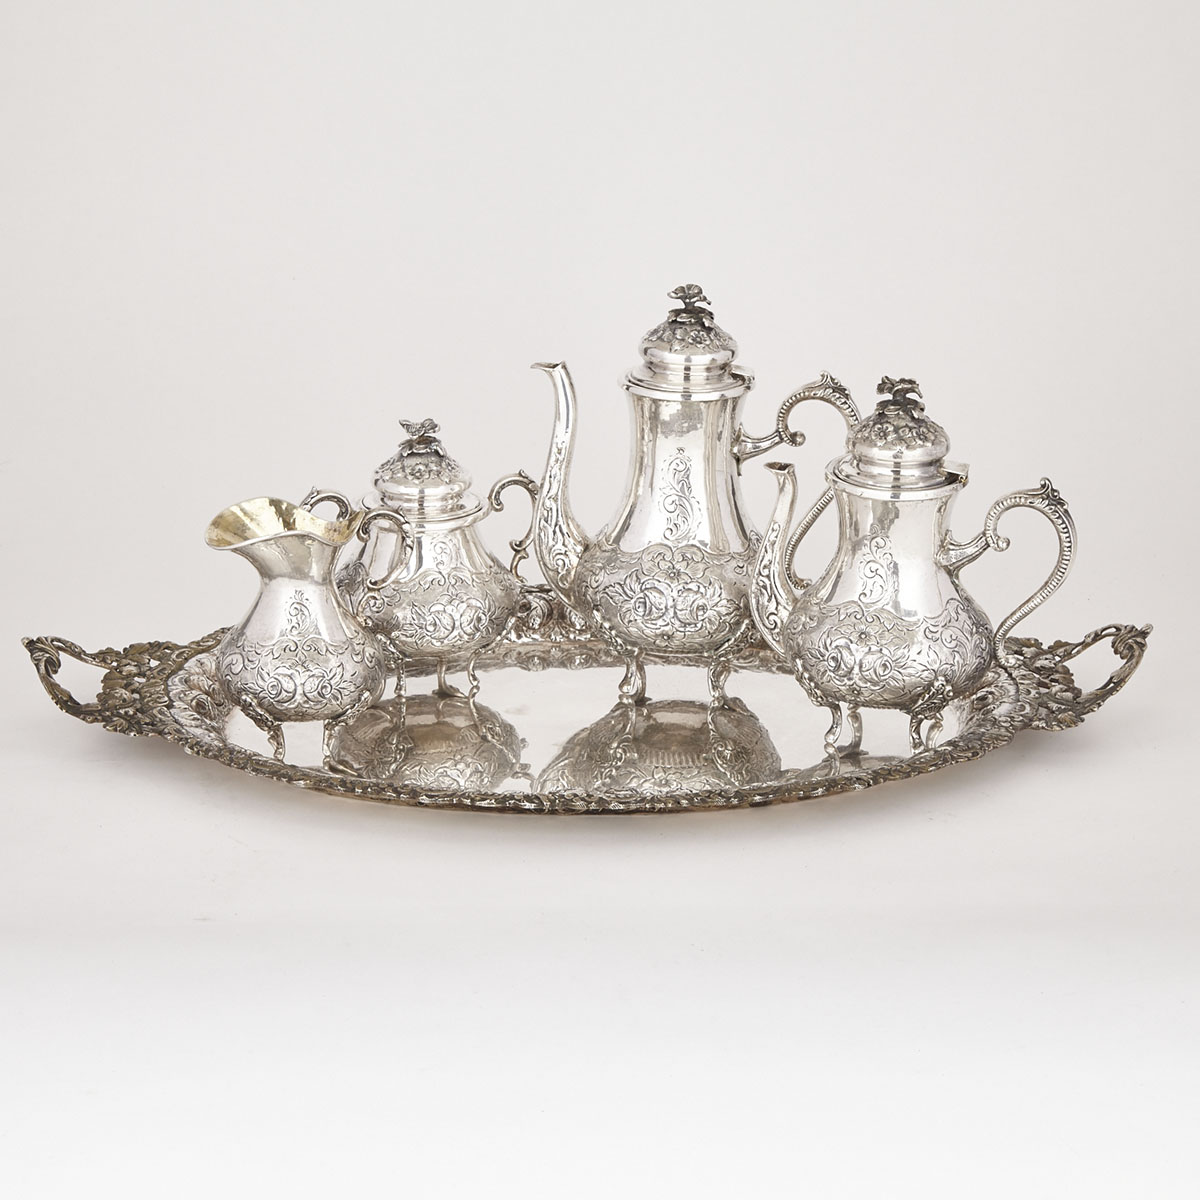 South American Silver Tea and Coffee Service, 20th century